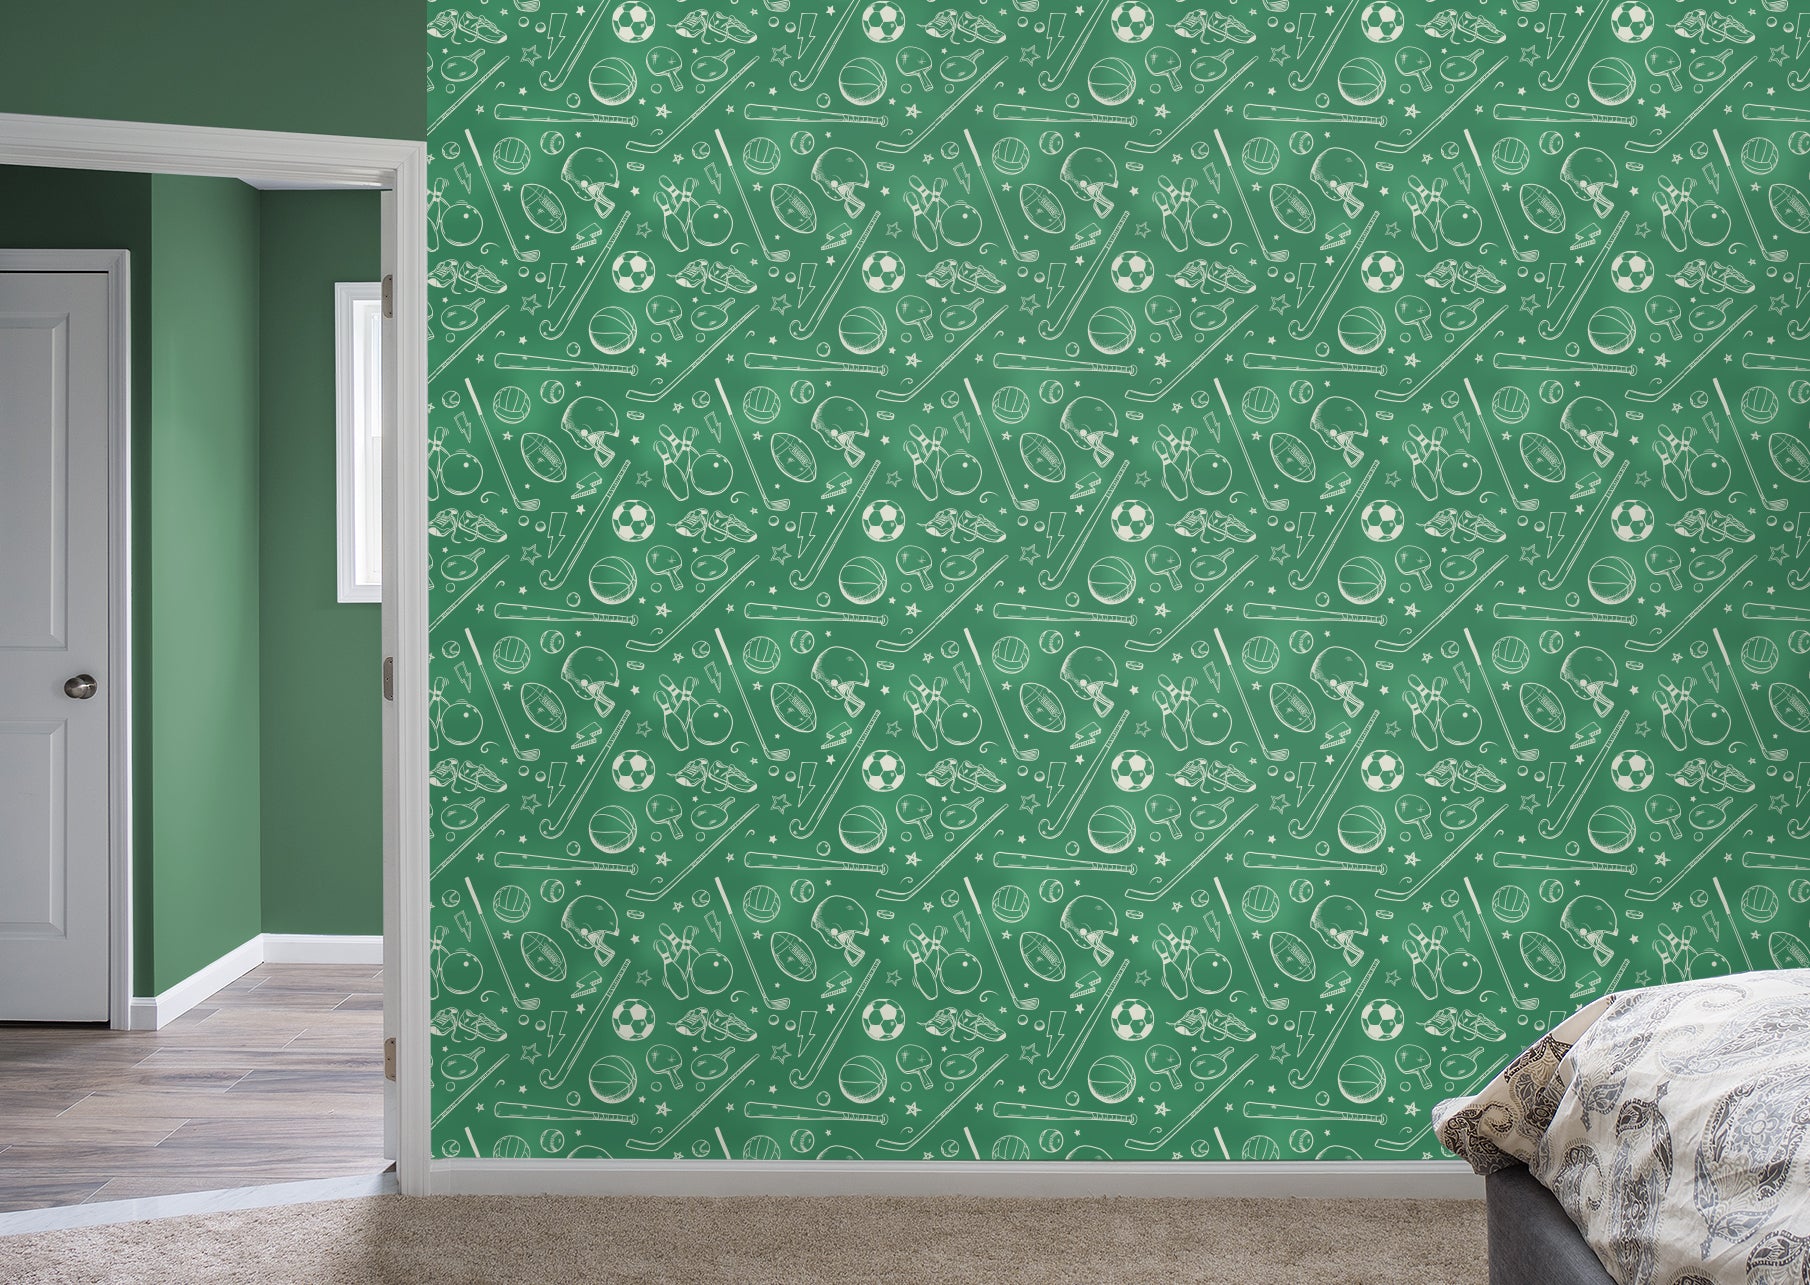 Master of Sports for Sports & Activities - Green for Sports & Activities - Peel & Stick Wallpaper 24" x 16.5 (33 sf) by Fathead